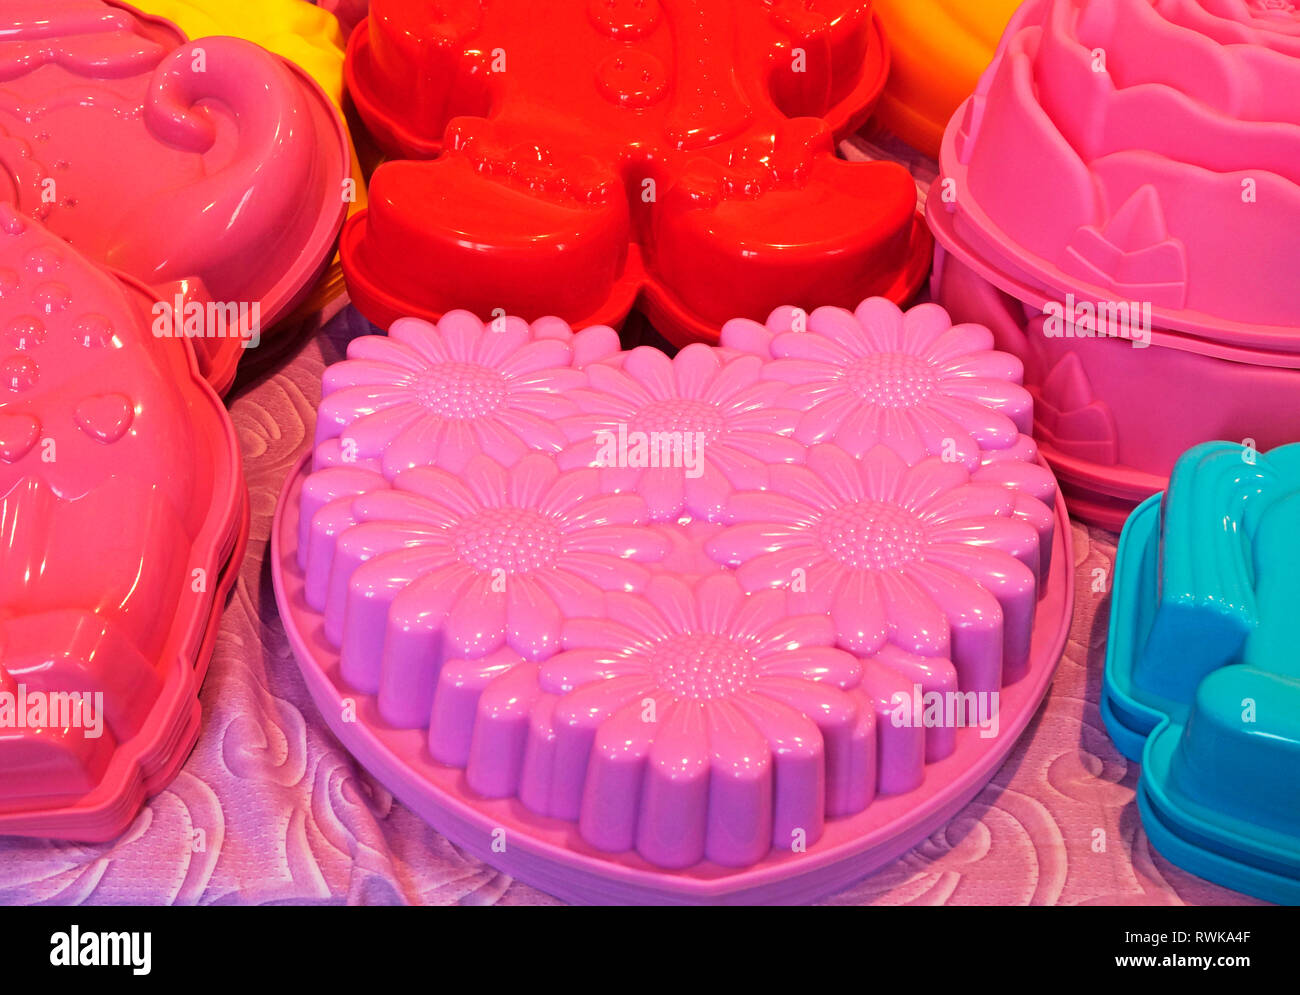 colorful silicon cake molds Stock Photo